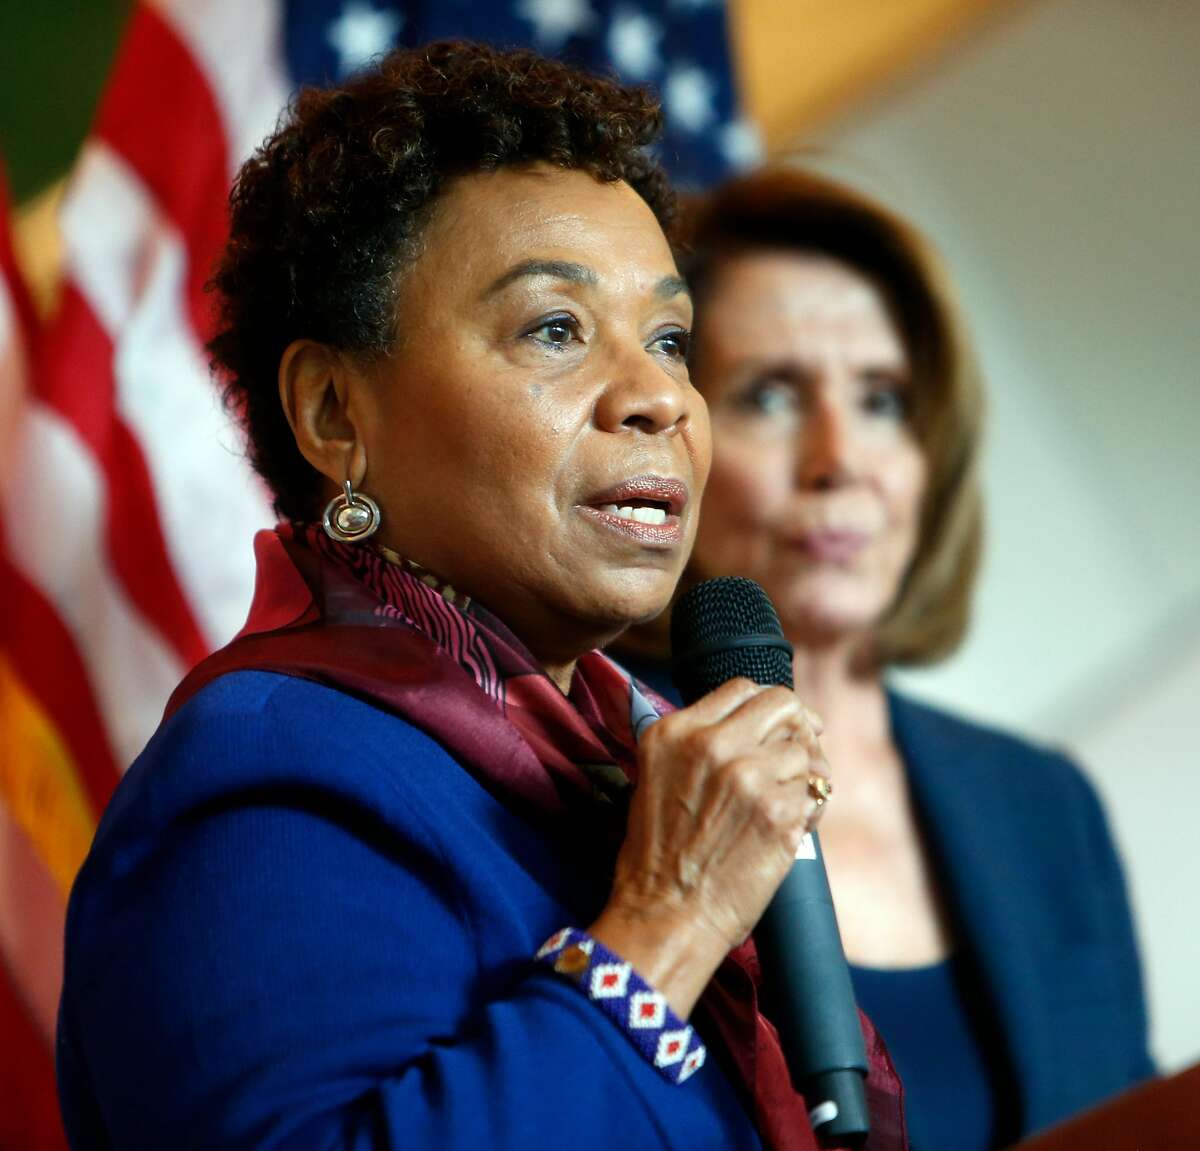 Congresswoman Barbara Lee introduces fellow Congresswoman Nancy Pelosi during press conference, on the harmful effect of the possible repeal of the Affordable Care Act, at Zuckerberg San Francisco General Hospital in San Francisco, Calif., on Saturday, January 7, 2017.